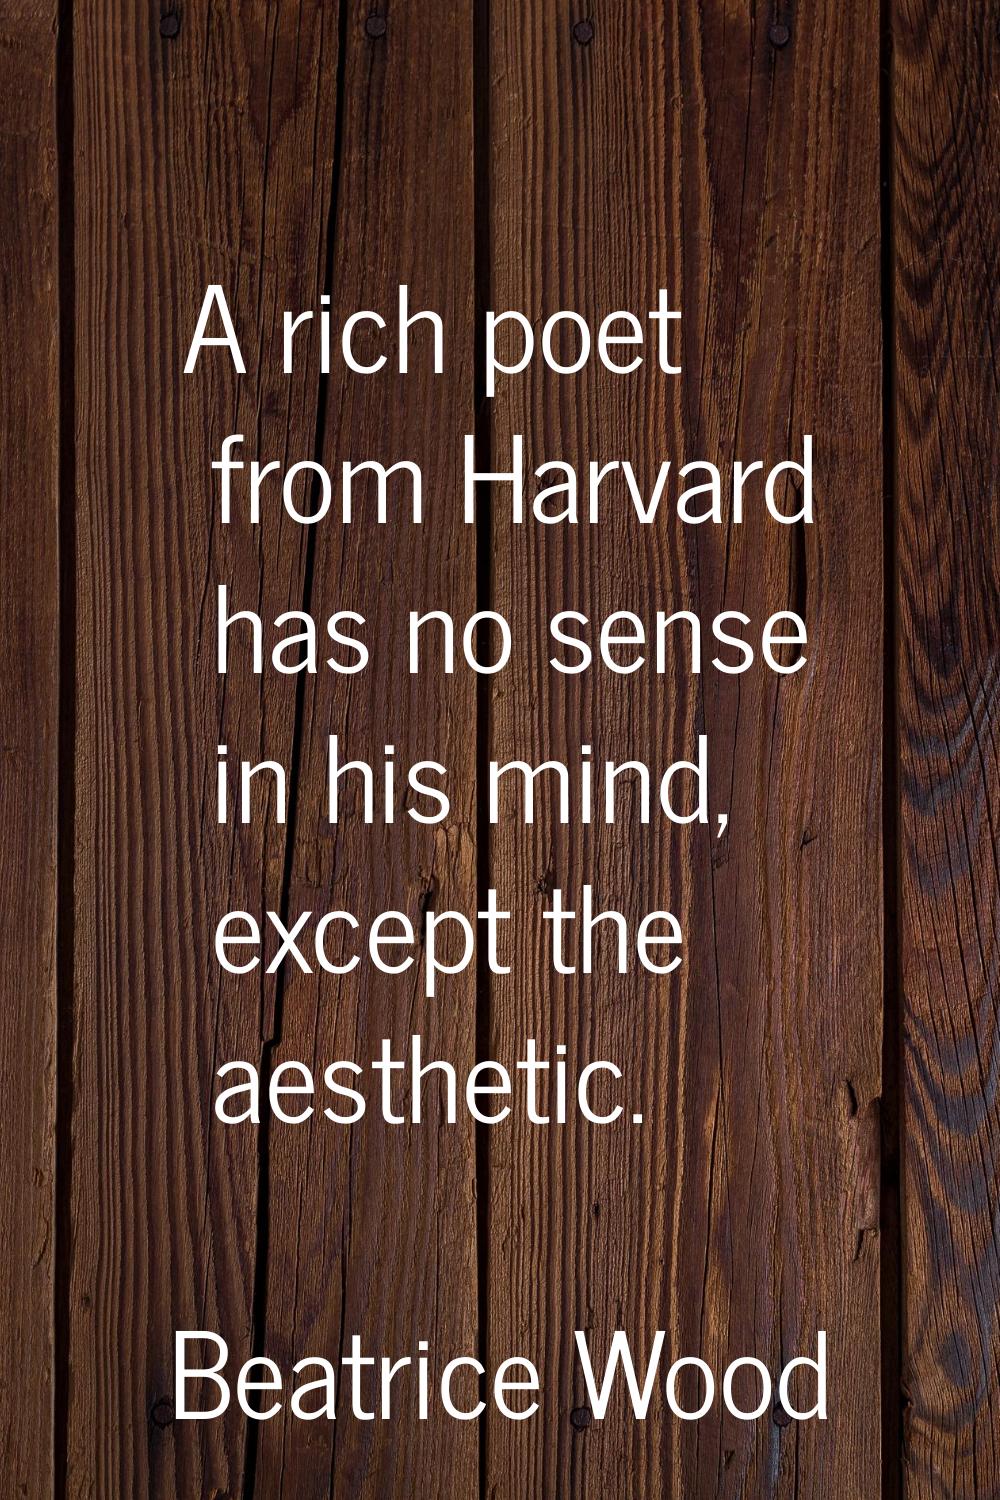 A rich poet from Harvard has no sense in his mind, except the aesthetic.